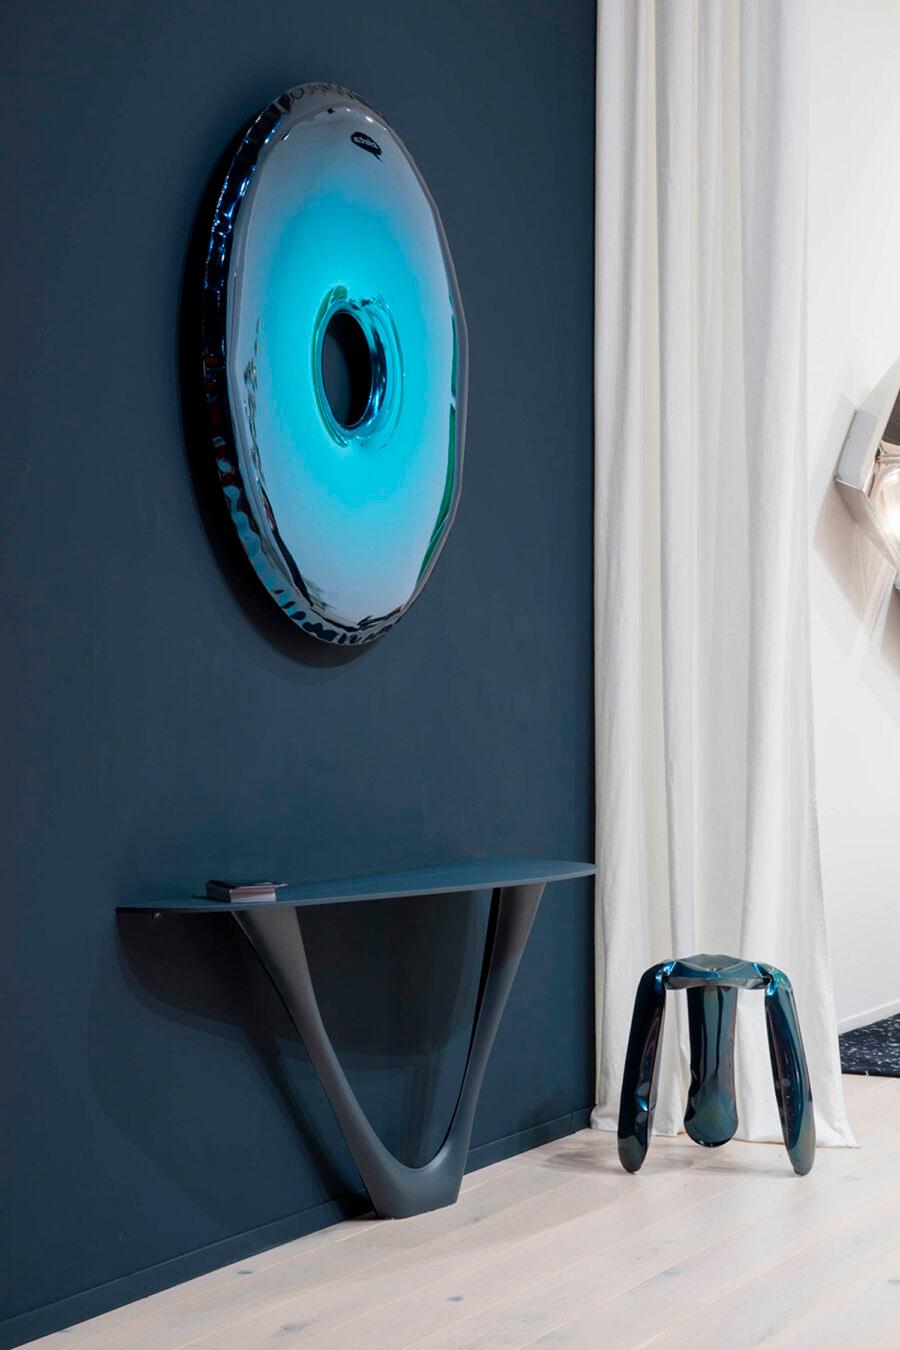 Rondo Mirror 'Deep Space Blue' by Zieta Prozessdesign
Gradient collection - Deep Space Blue

Stainless steel
Measures: 75 x 6 cm.

Several sizes available: 
Diameter: 75 cm / 120 cm / 150 cm



Zieta is best known for his collection of